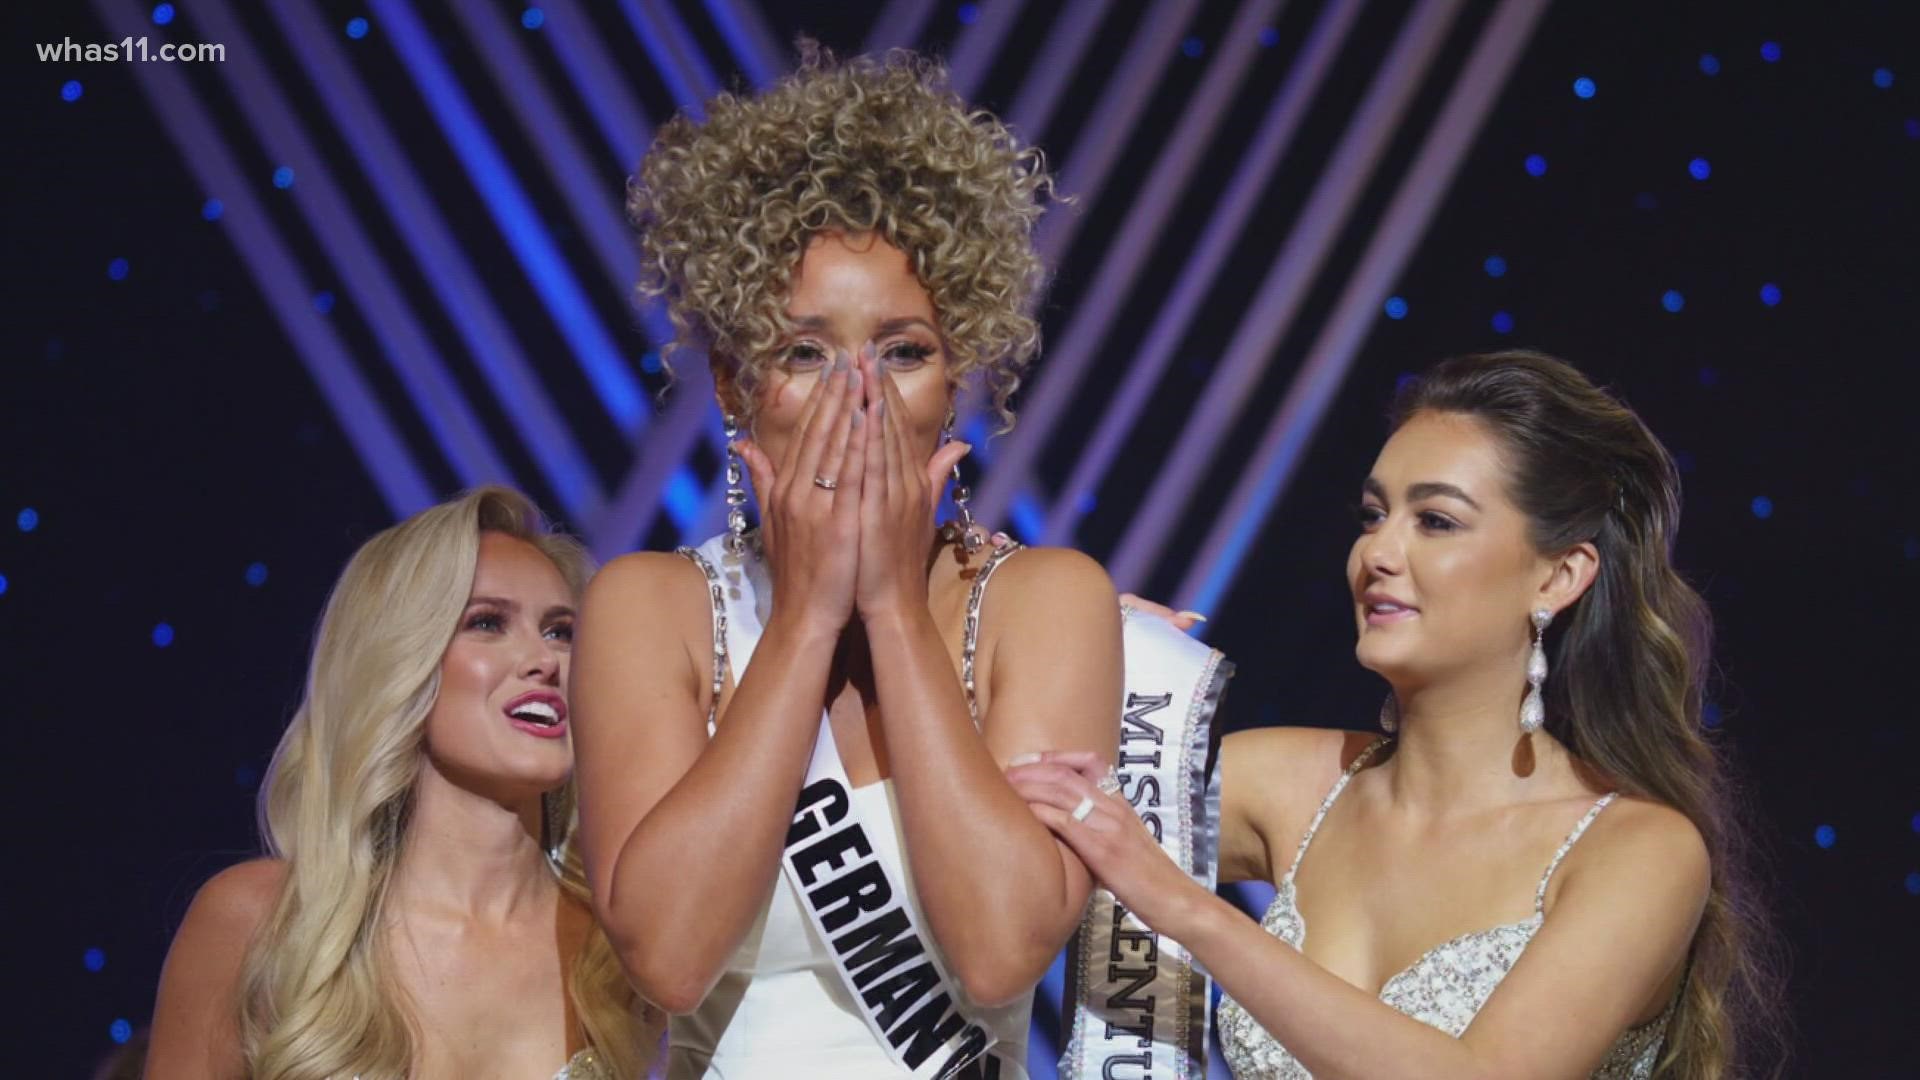 Elle Smith is working to win Miss Universe, but first, the current Miss Kentucky has to win Miss USA. She shares a behind the scenes look as she heads to Tulsa.